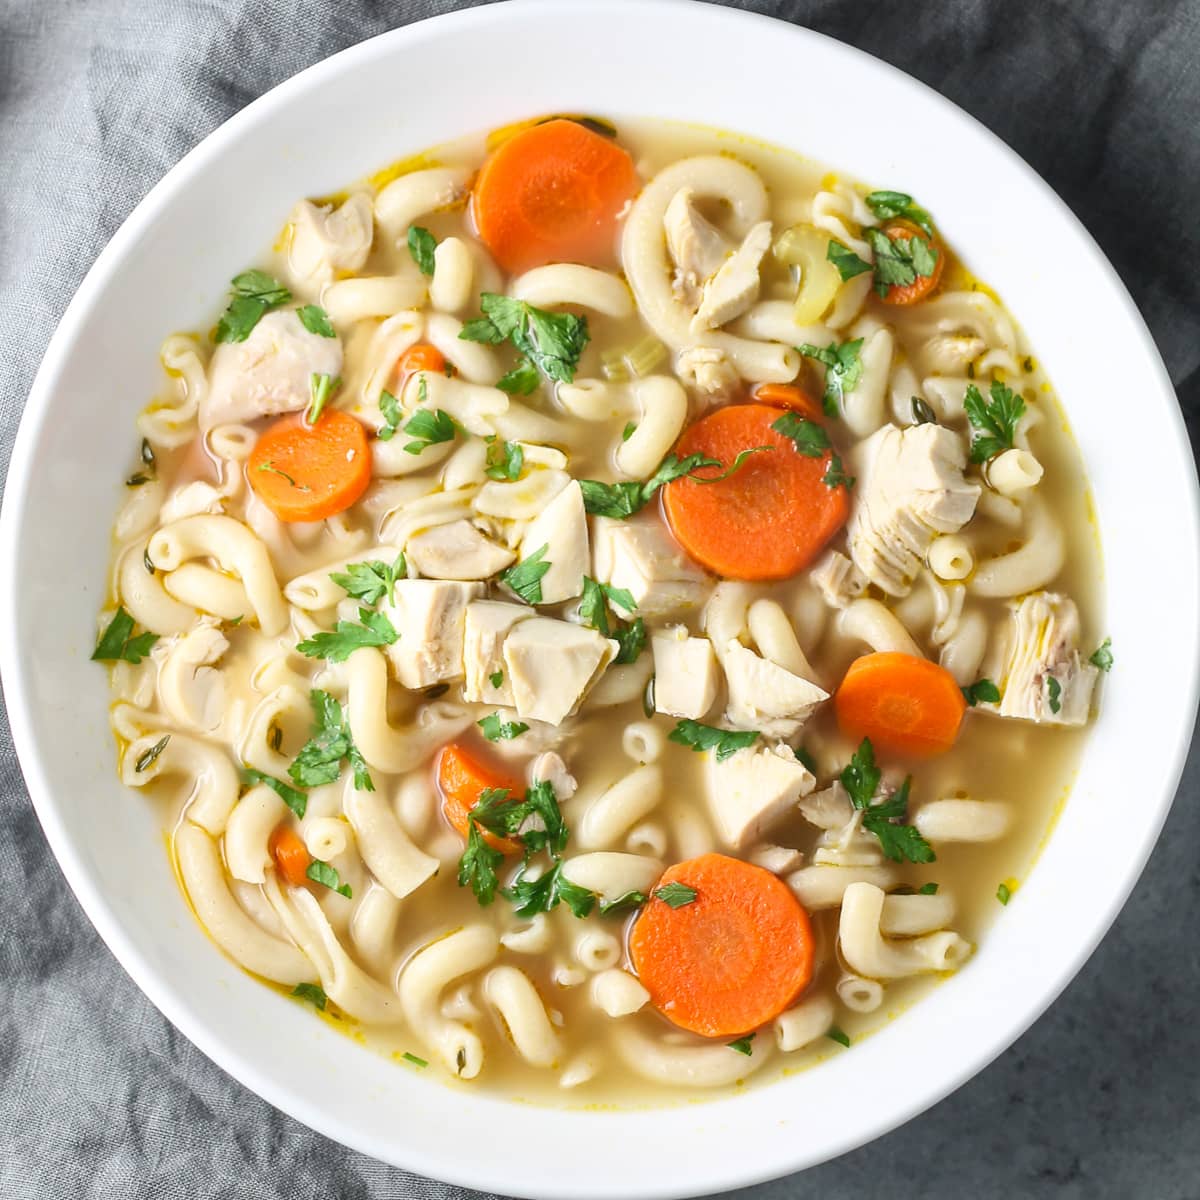 A large bowl of homemade low FODMAP chicken noodle soup.